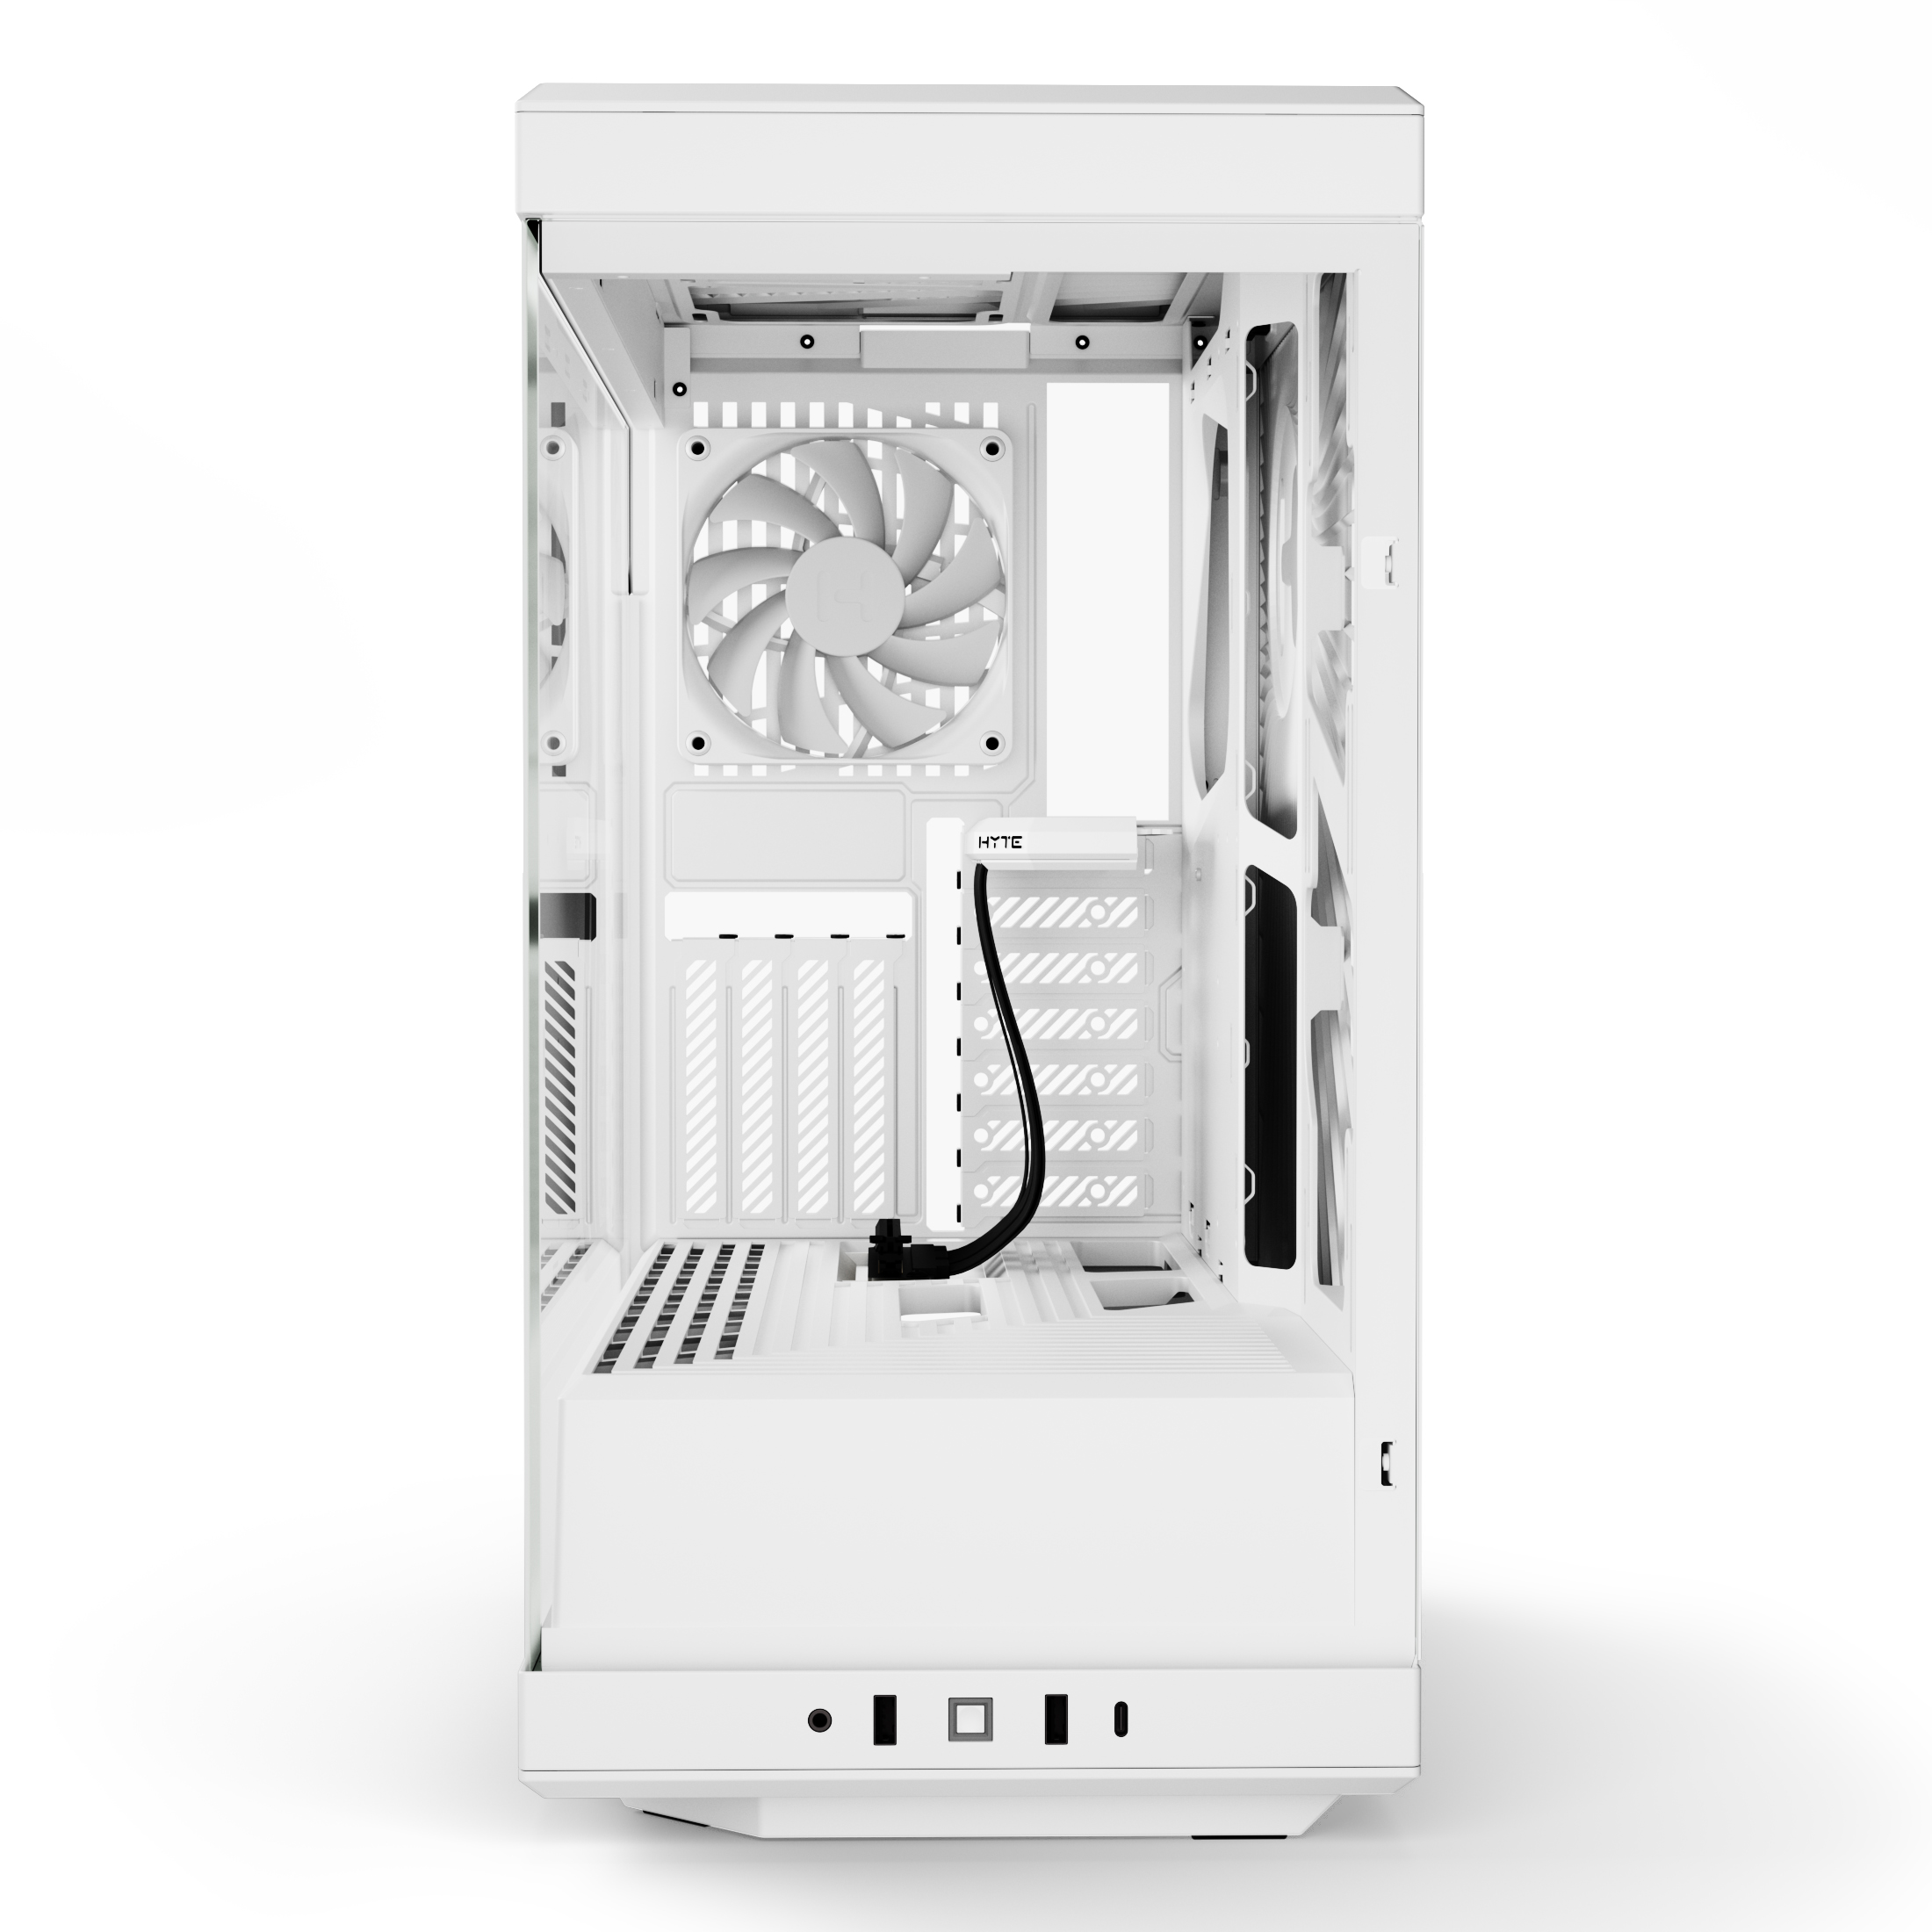 HYTE Y40 Premium Mid-Tower Chassis Review - Page 4 of 5 - Funky Kit